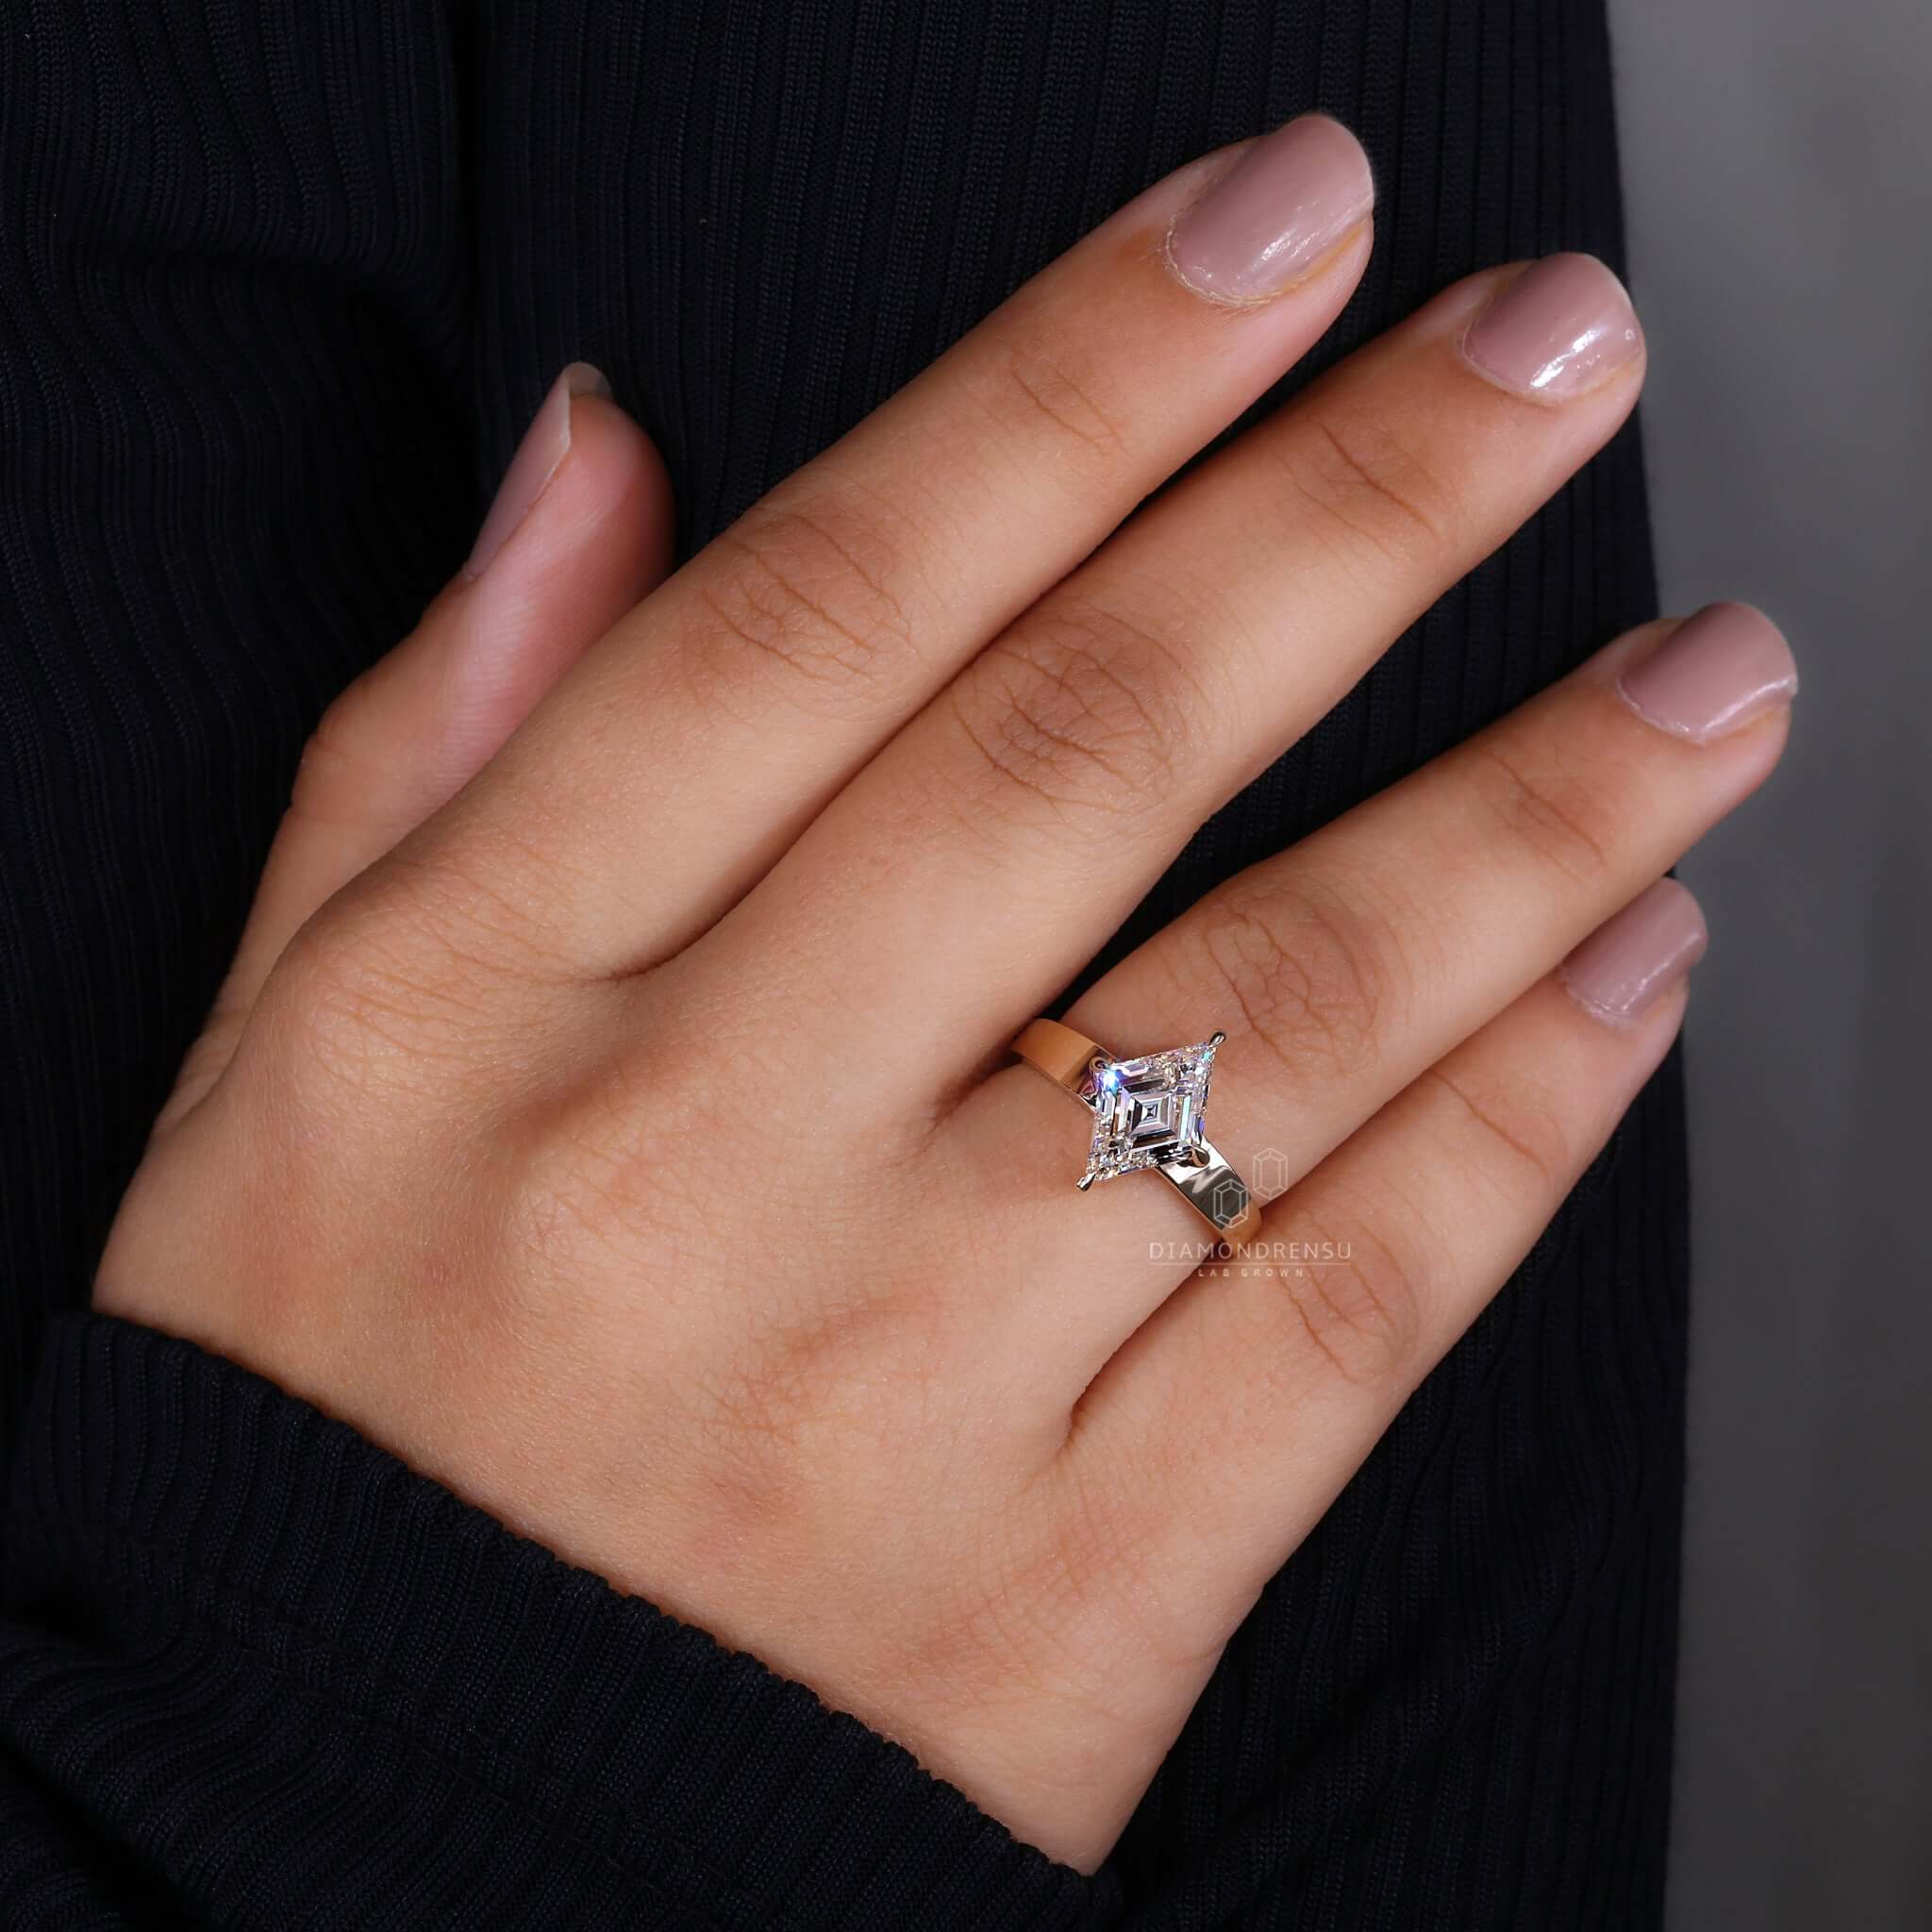 A solitaire diamond engagement ring with a unique lozenge cut, exuding timeless sophistication and elegance.